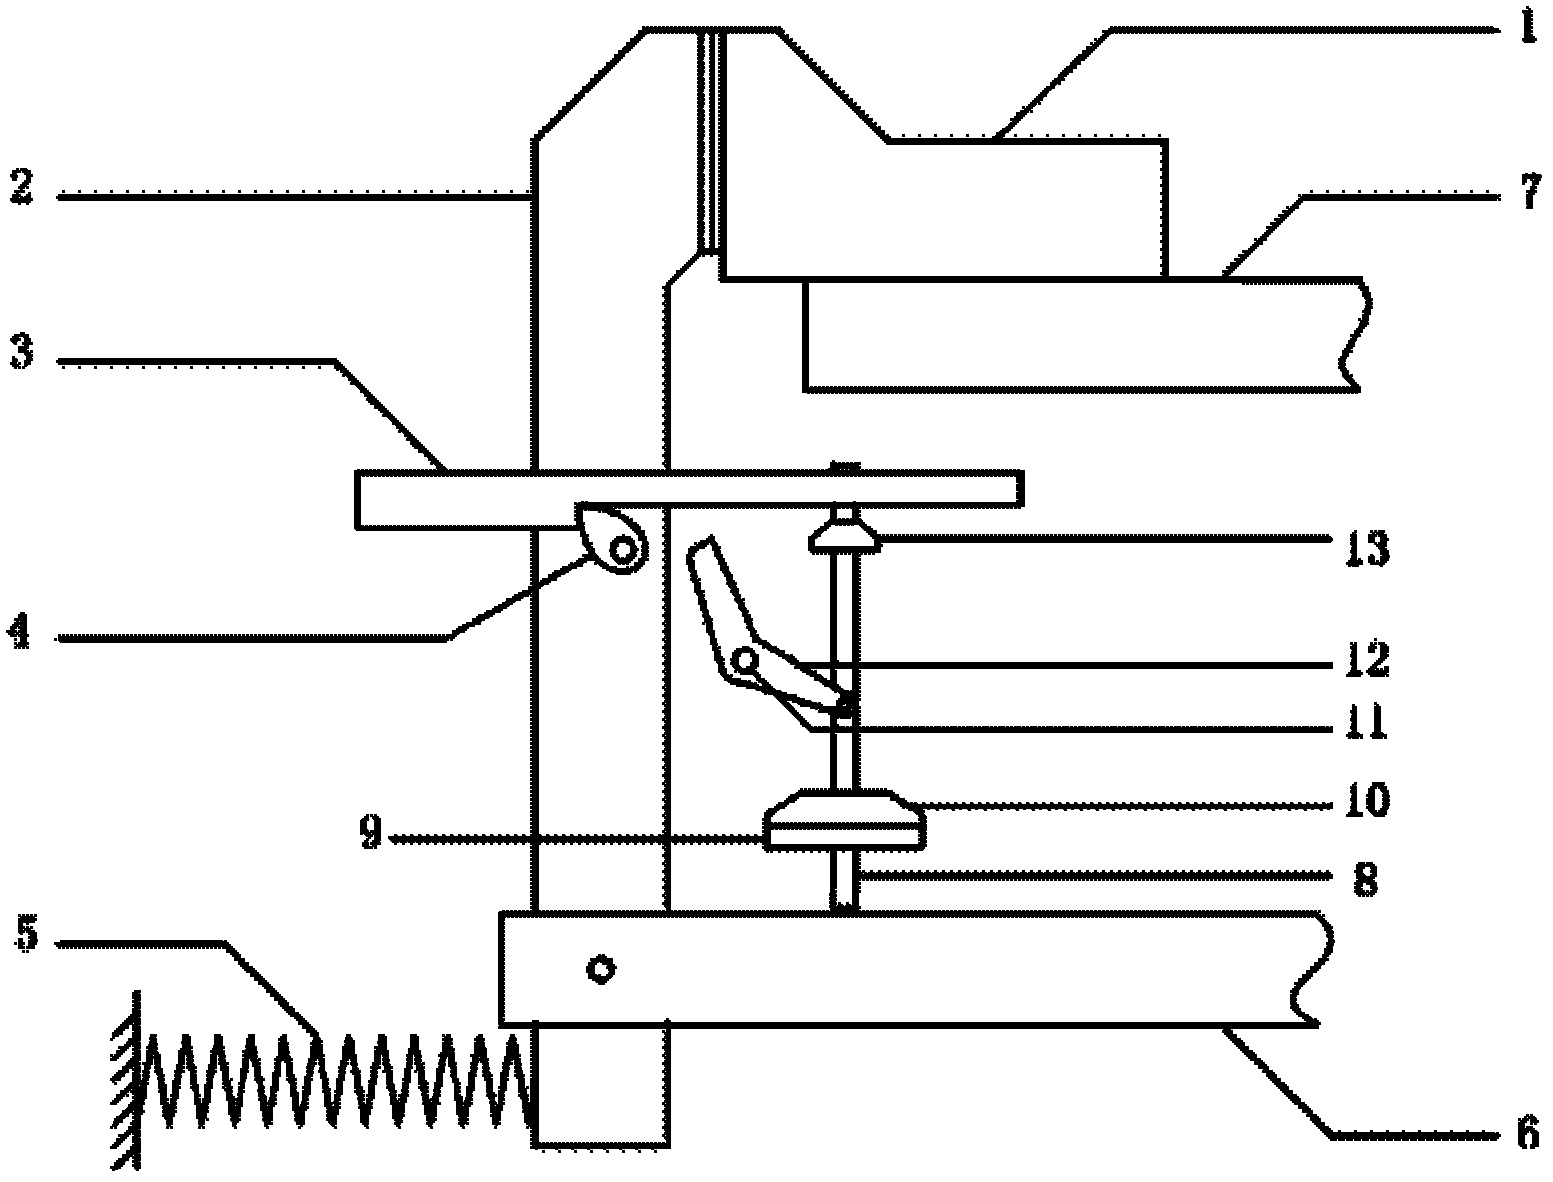 DC (direct current) circuit breaker rapid operating mechanism with current limiting characteristic